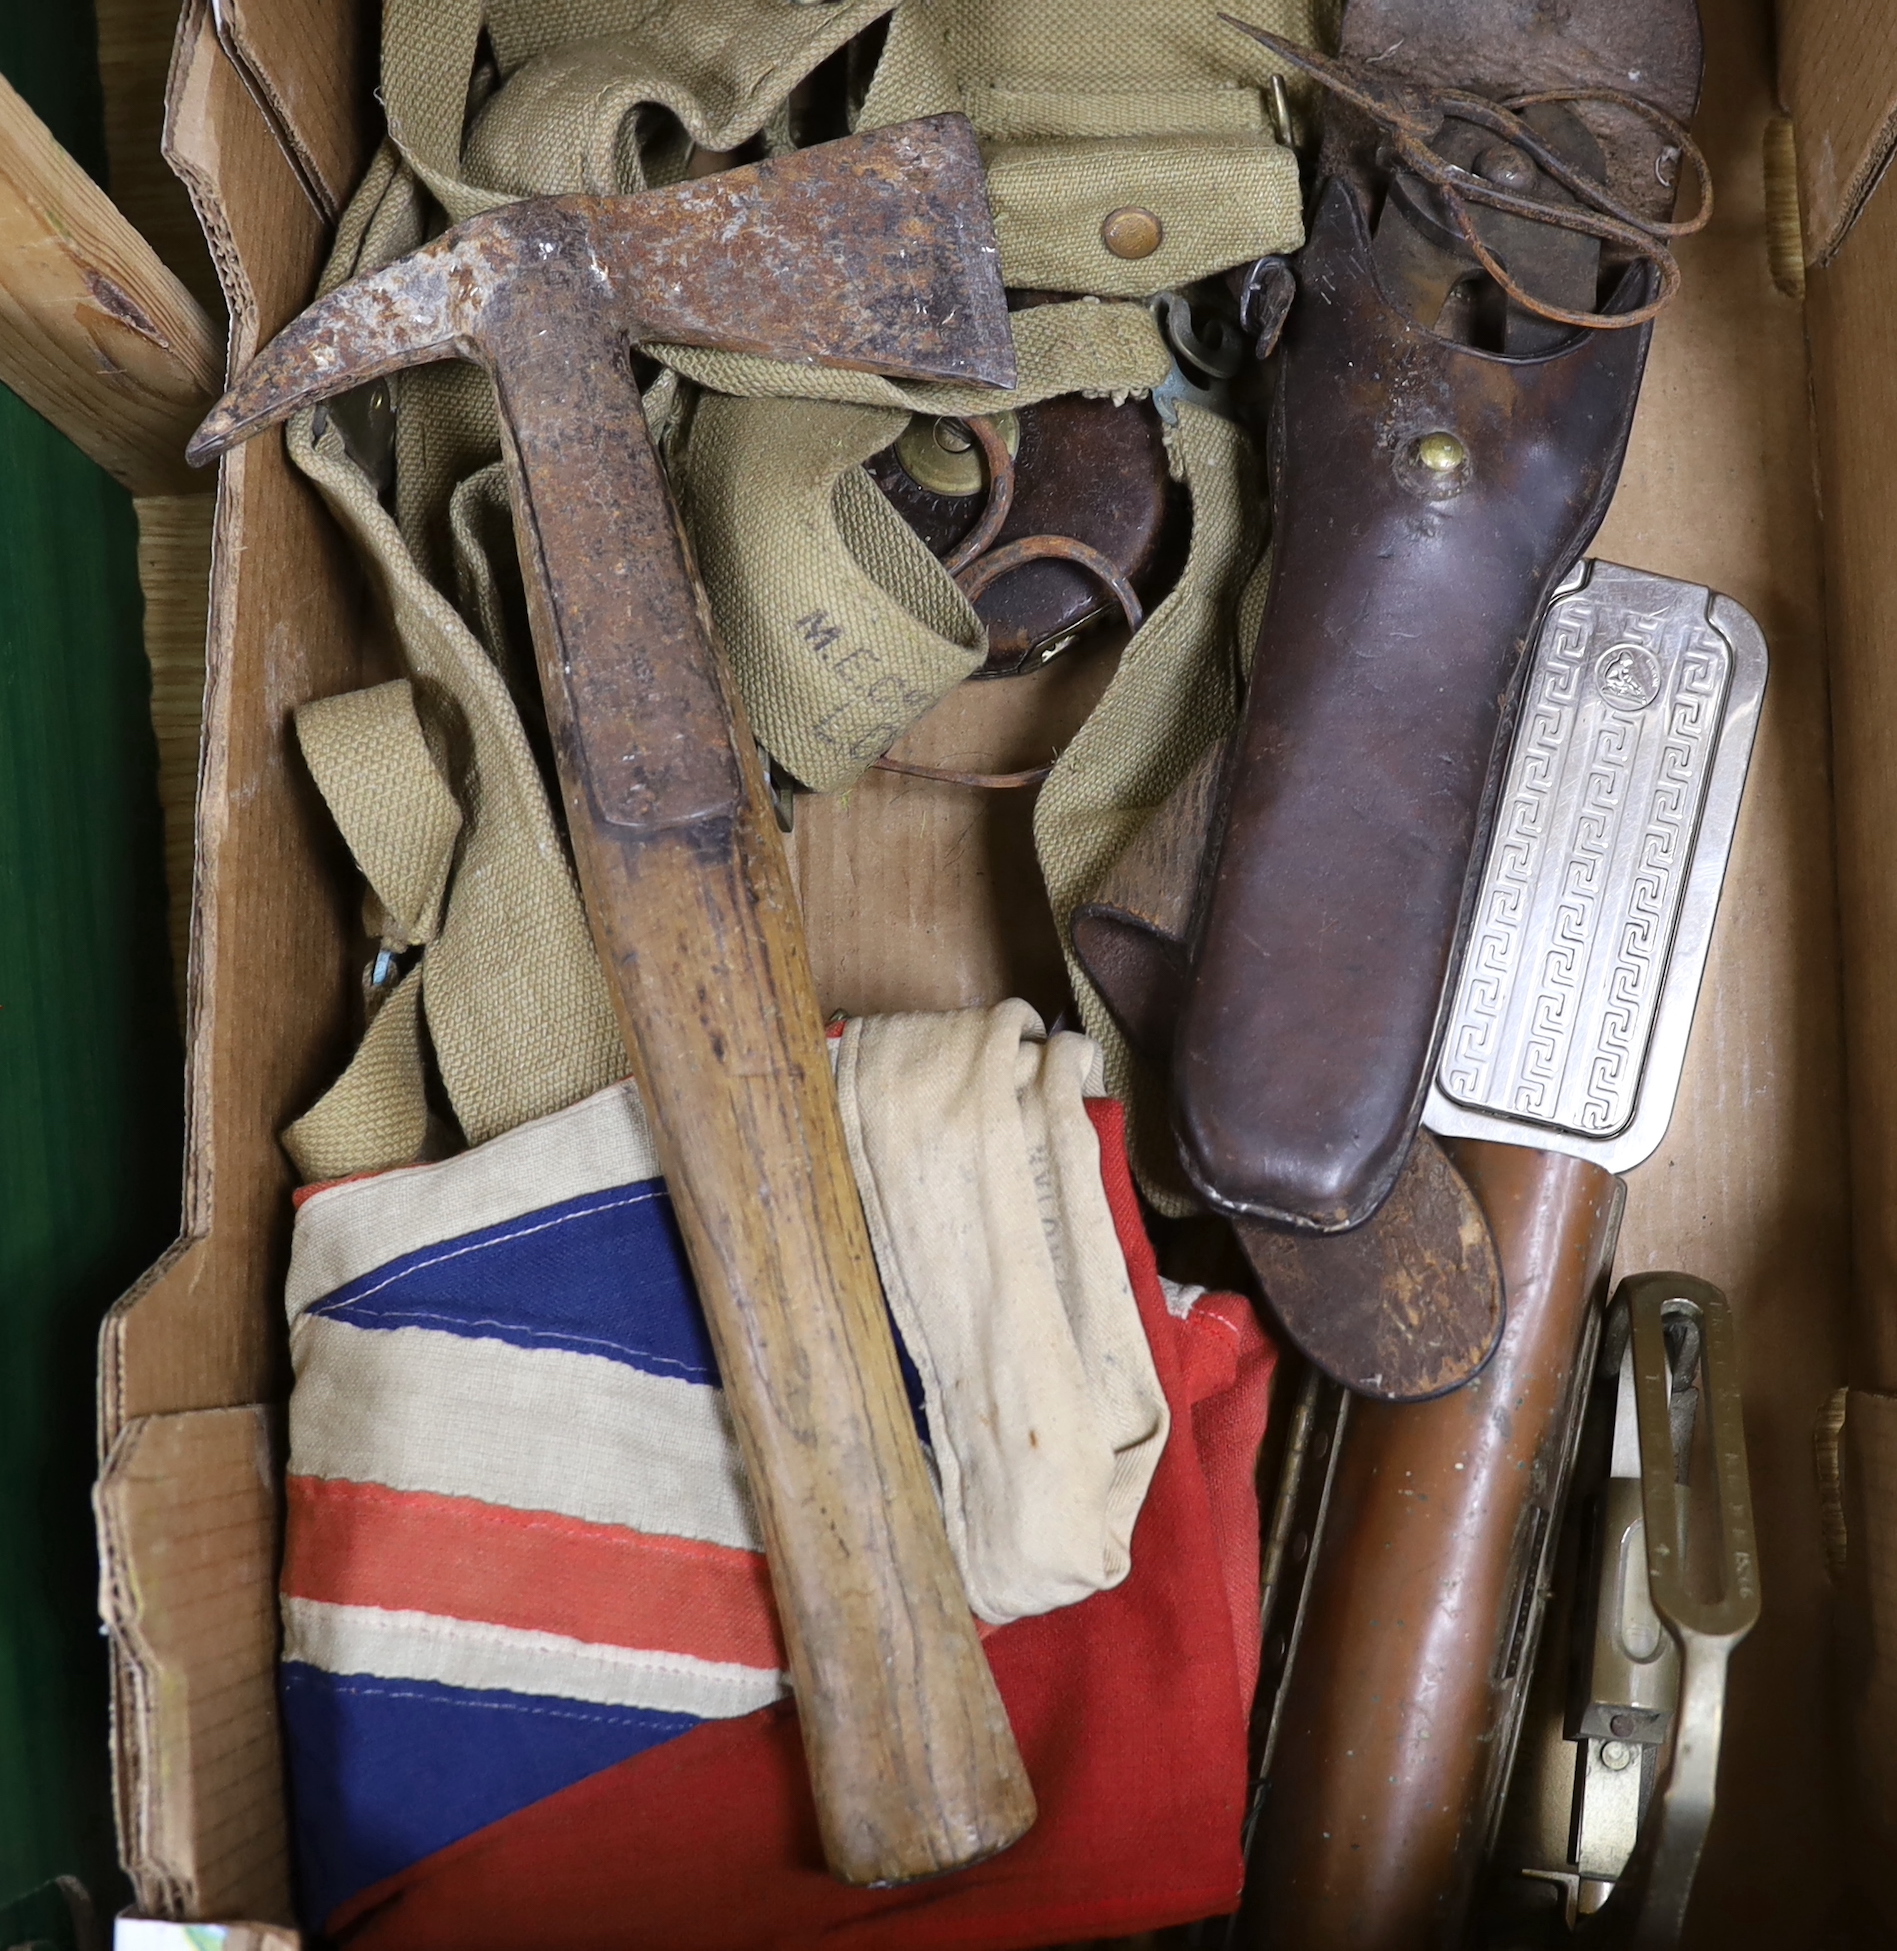 A collection of militaria including a union flag, gunners sight, camouflage webbing, a water bottle, - Image 2 of 5